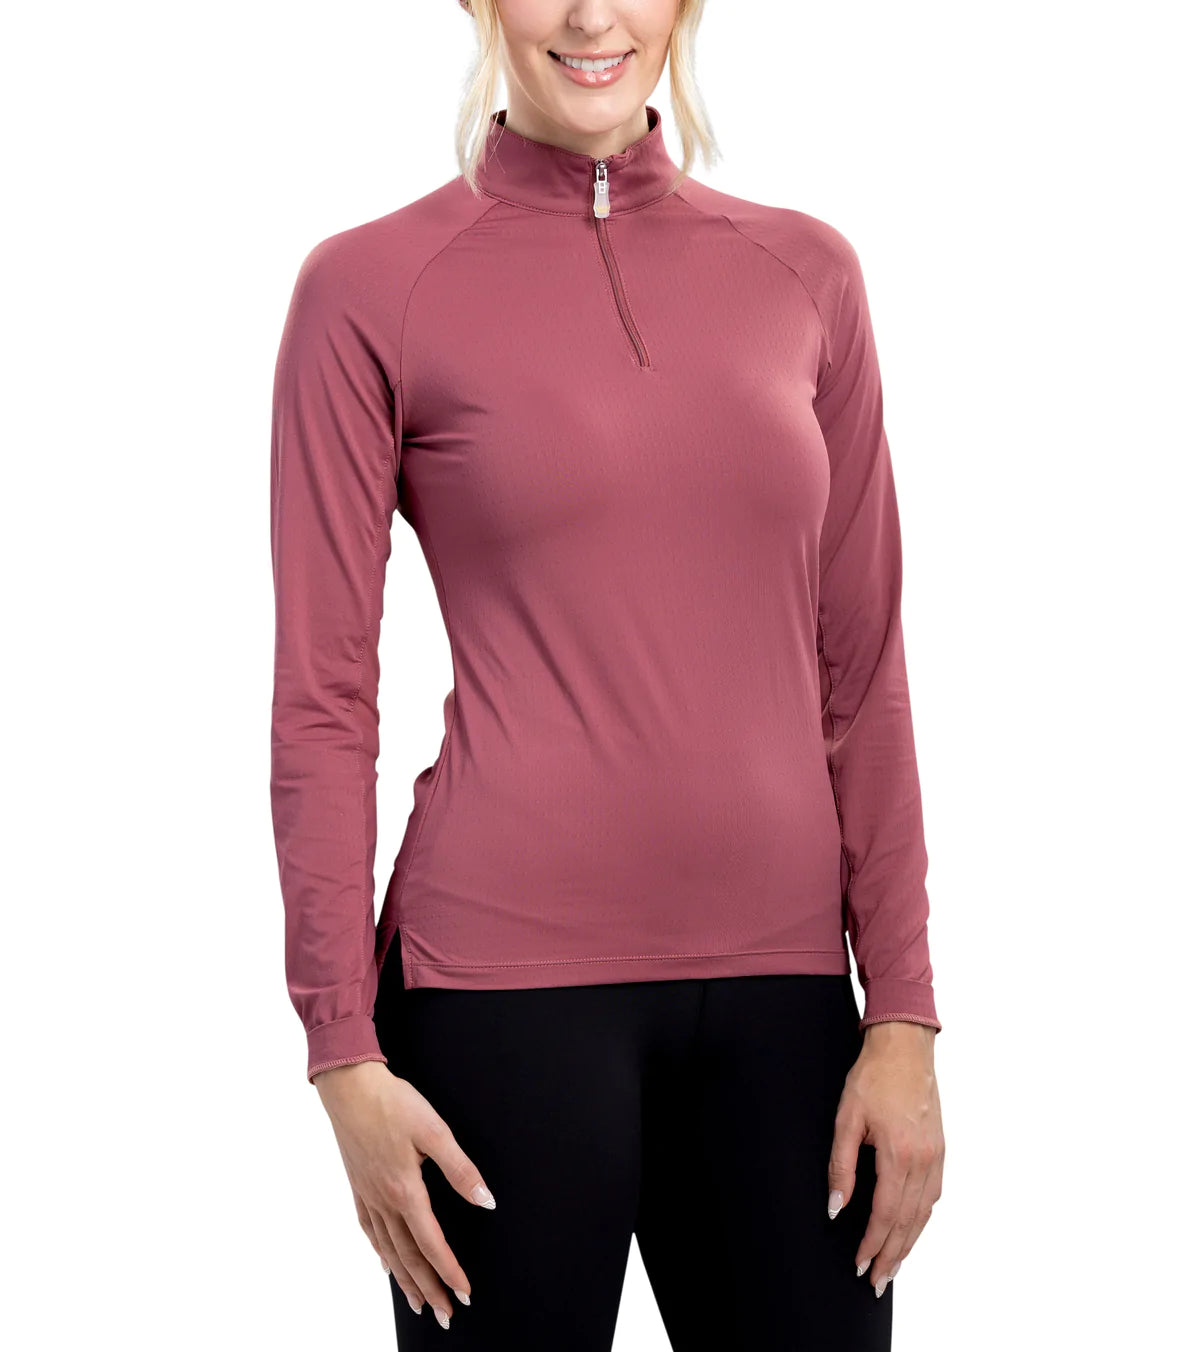 1/4 Zip Ruched Back Long Sleeve - Dusty Rose